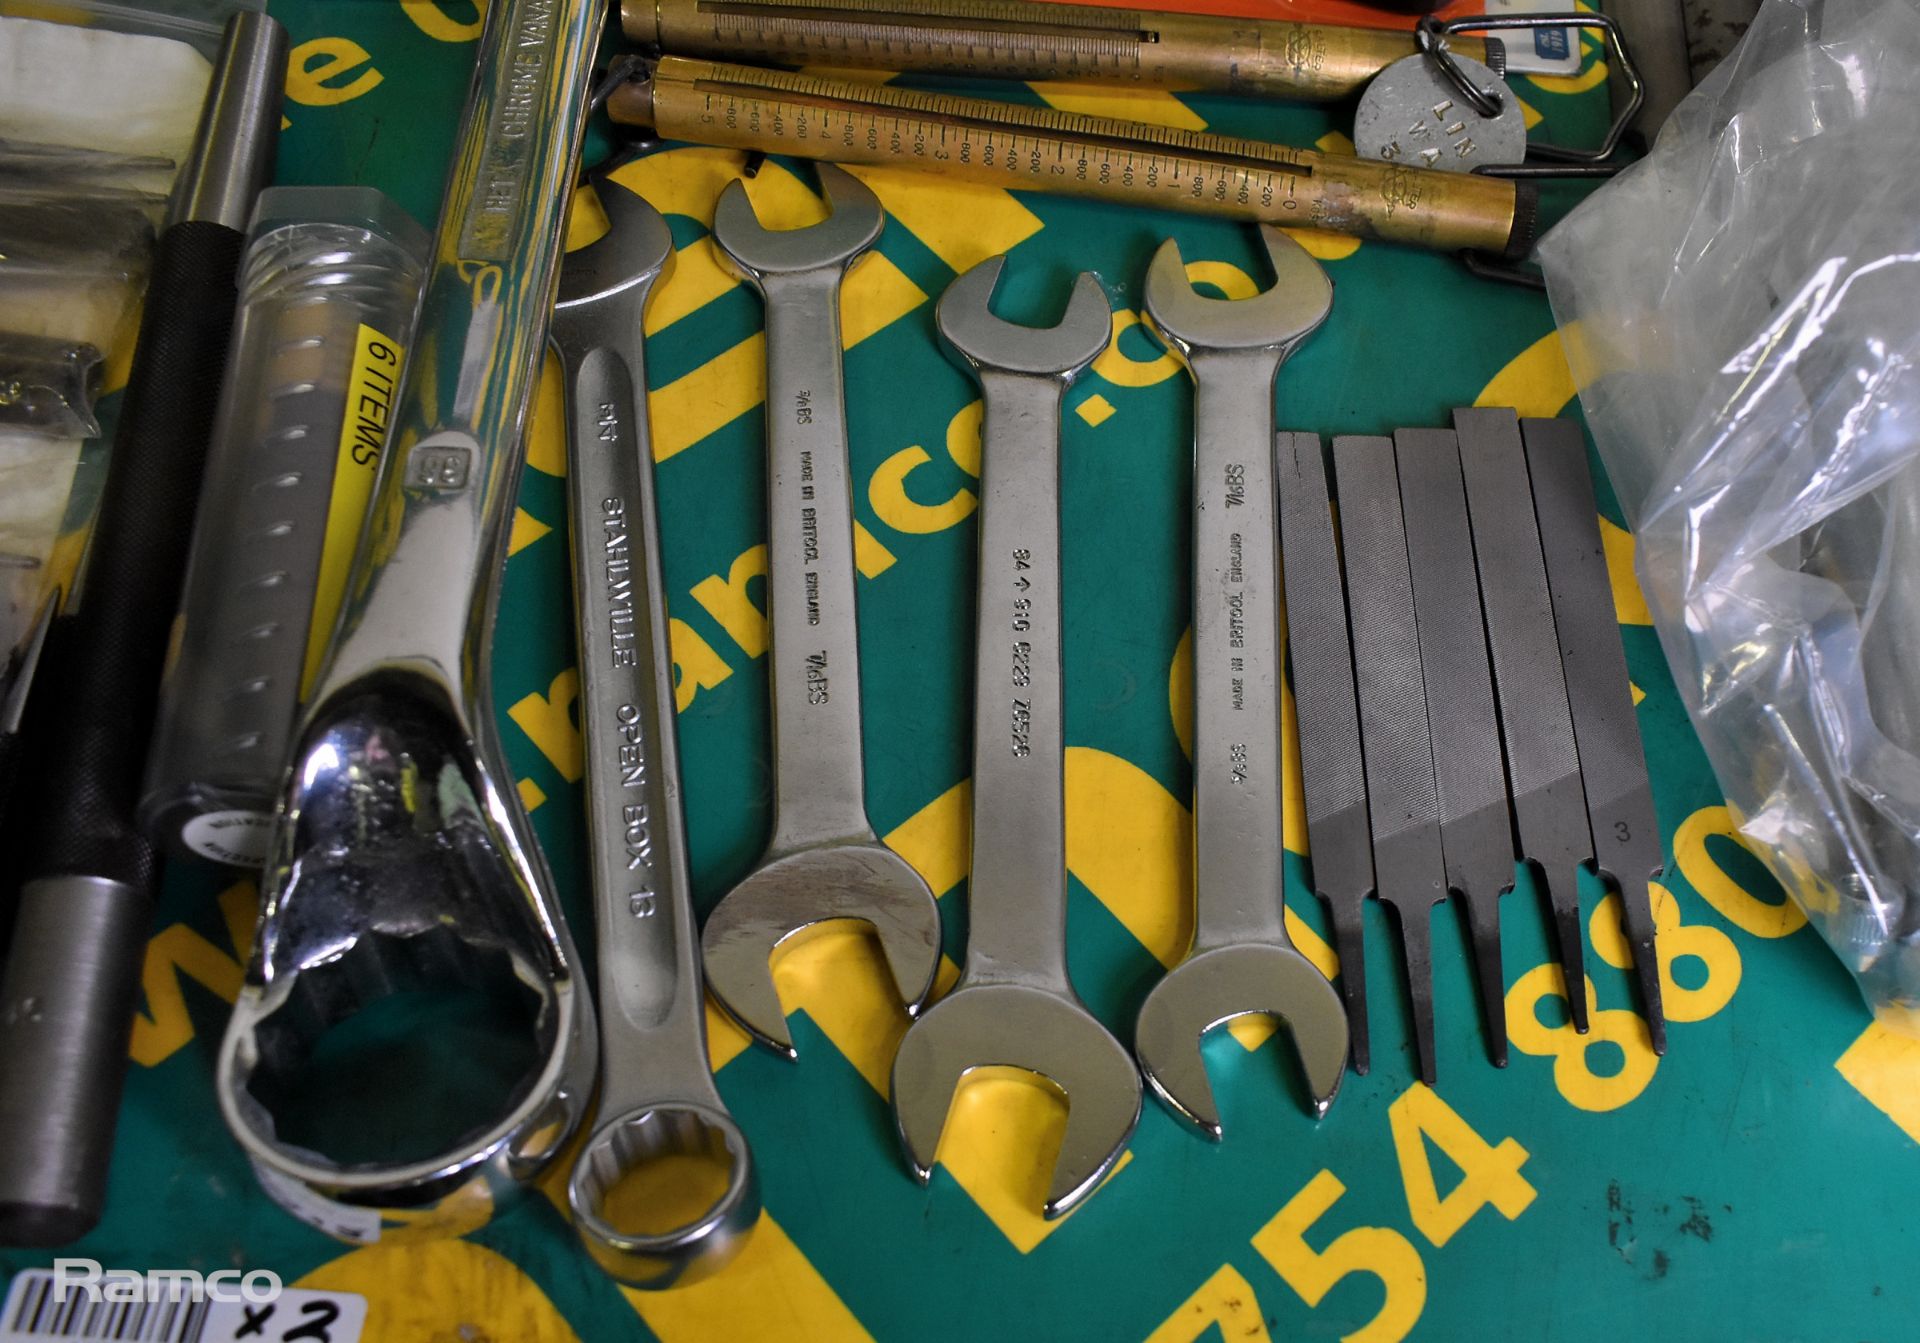 Hand tools - screwdrivers, hand files, sockets, wrenches, punches, solder reel & more - Image 7 of 9